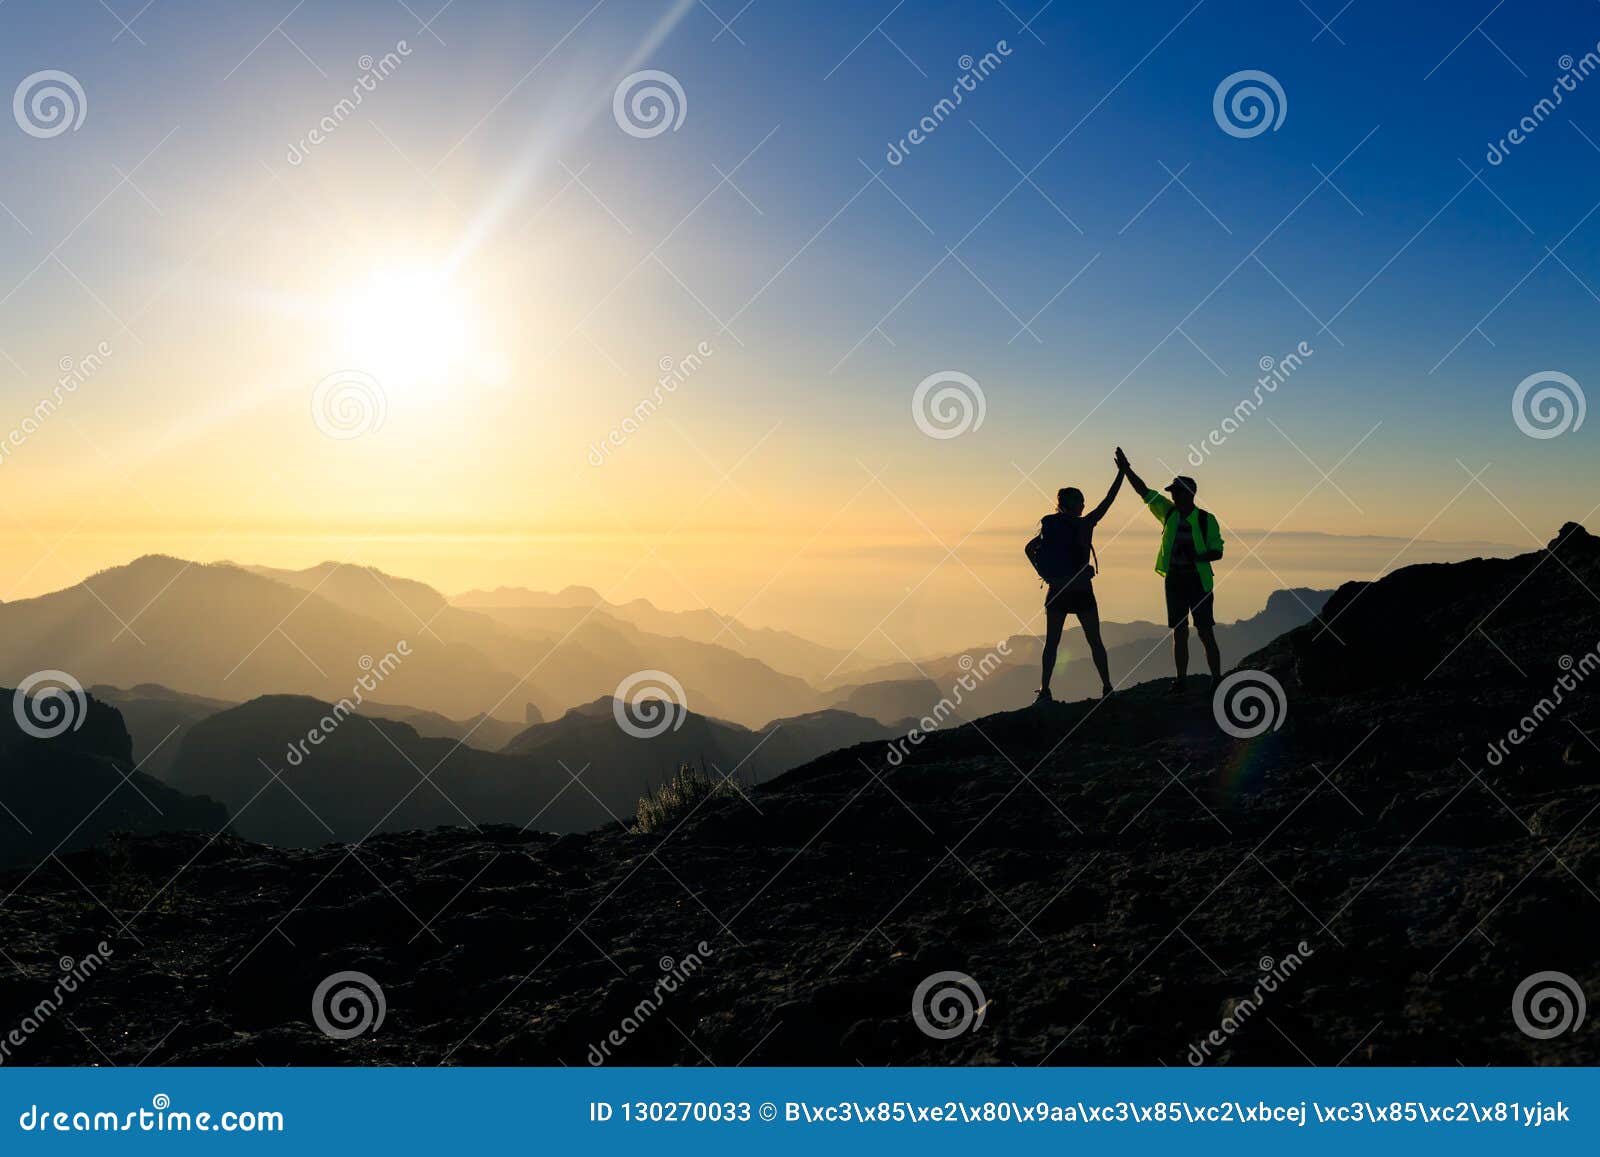 couple hikers celebrating success concept in mountains